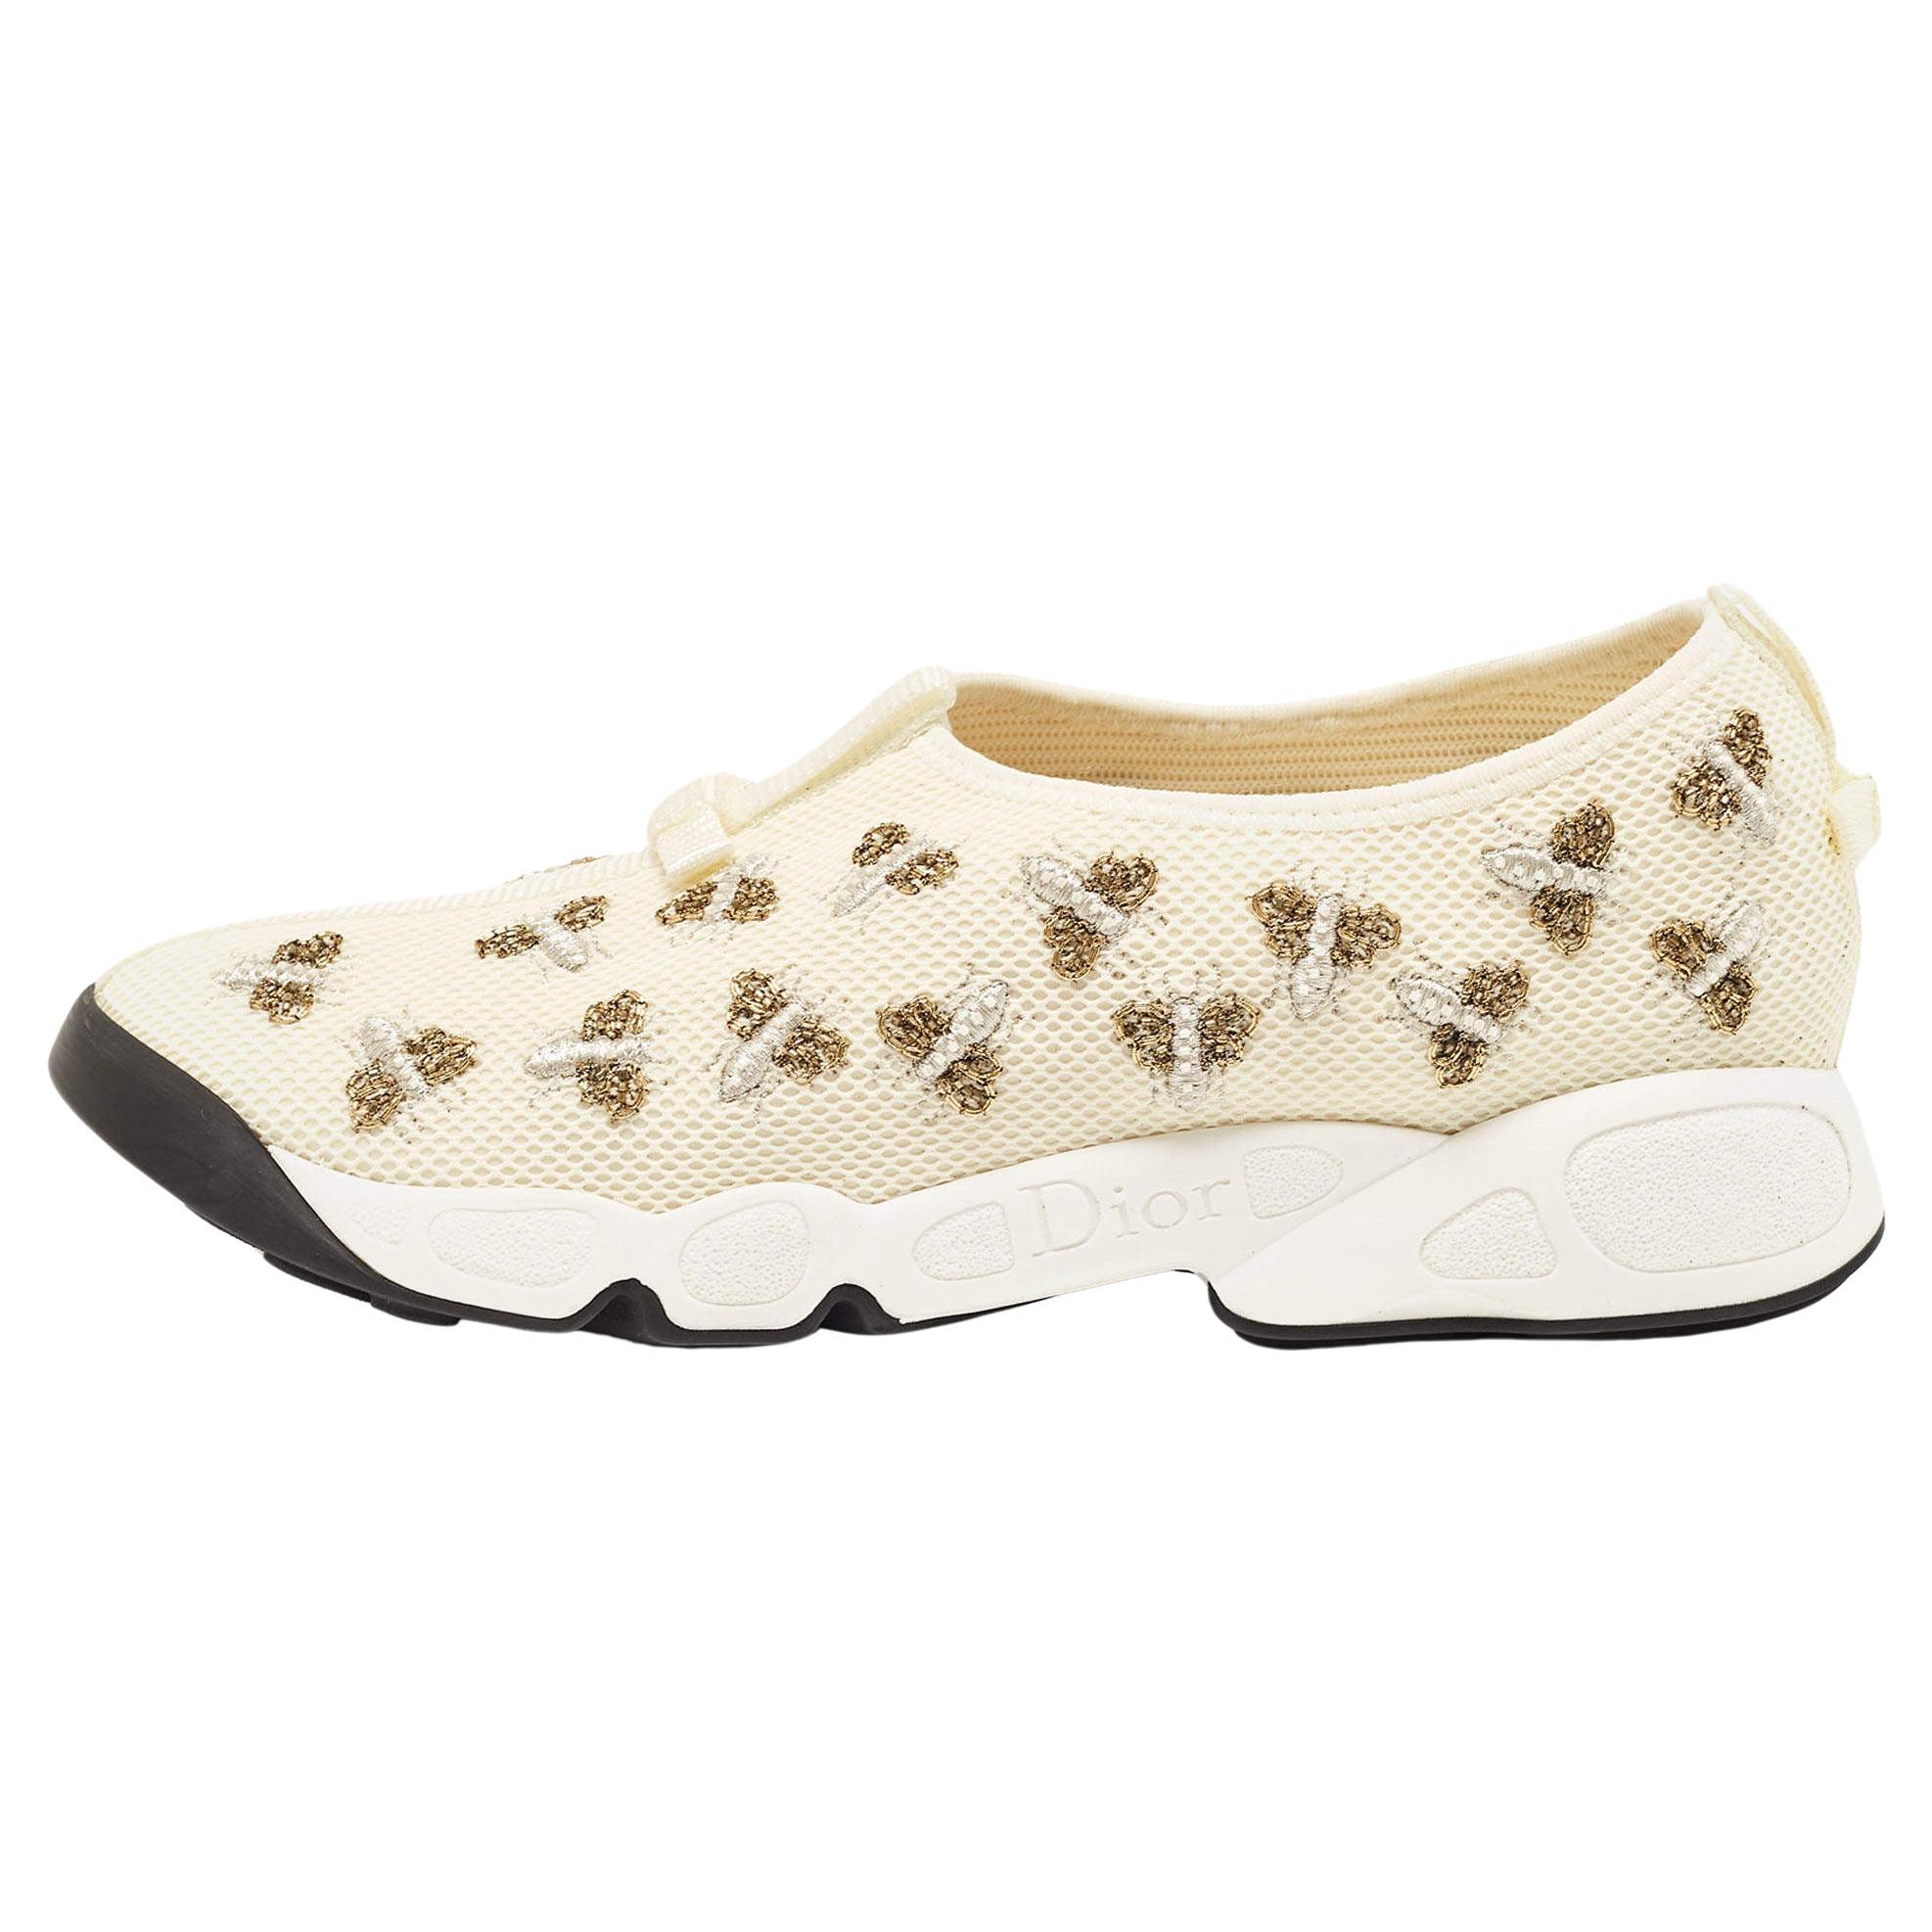 Dior Cream Mesh Fusion Bee Embraided Low Top Sneakers Size 39.5